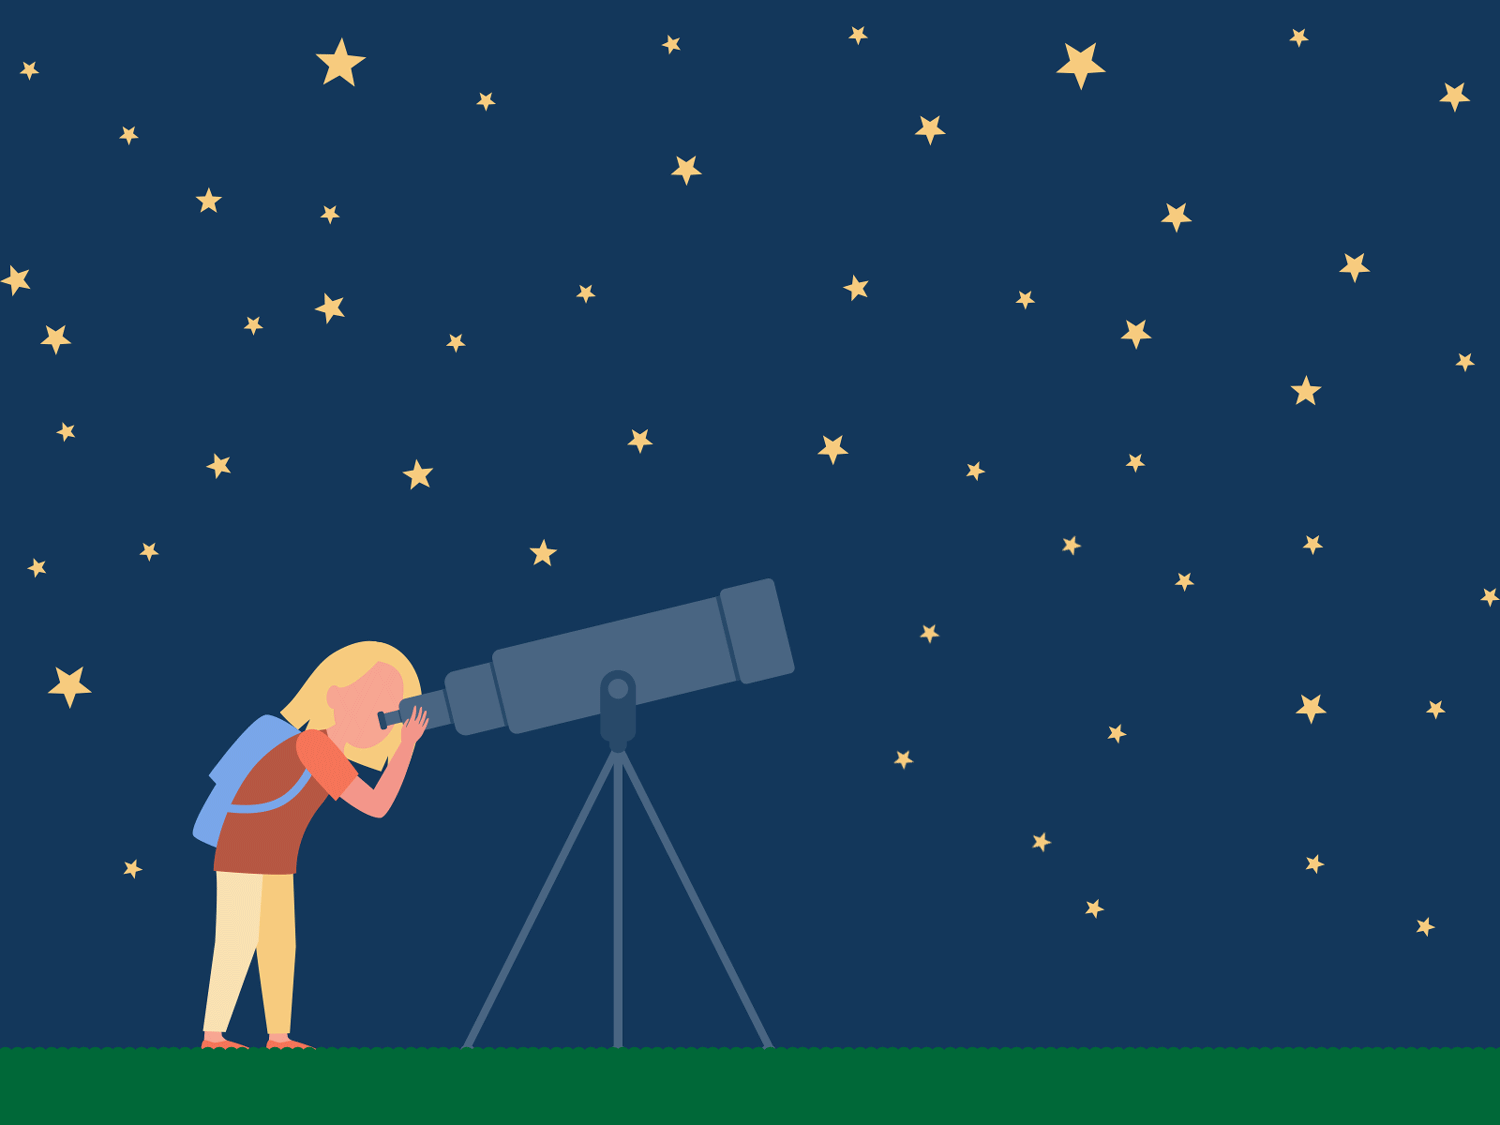 A person looks through a telescope and sees a lit up green object floating in the sky.